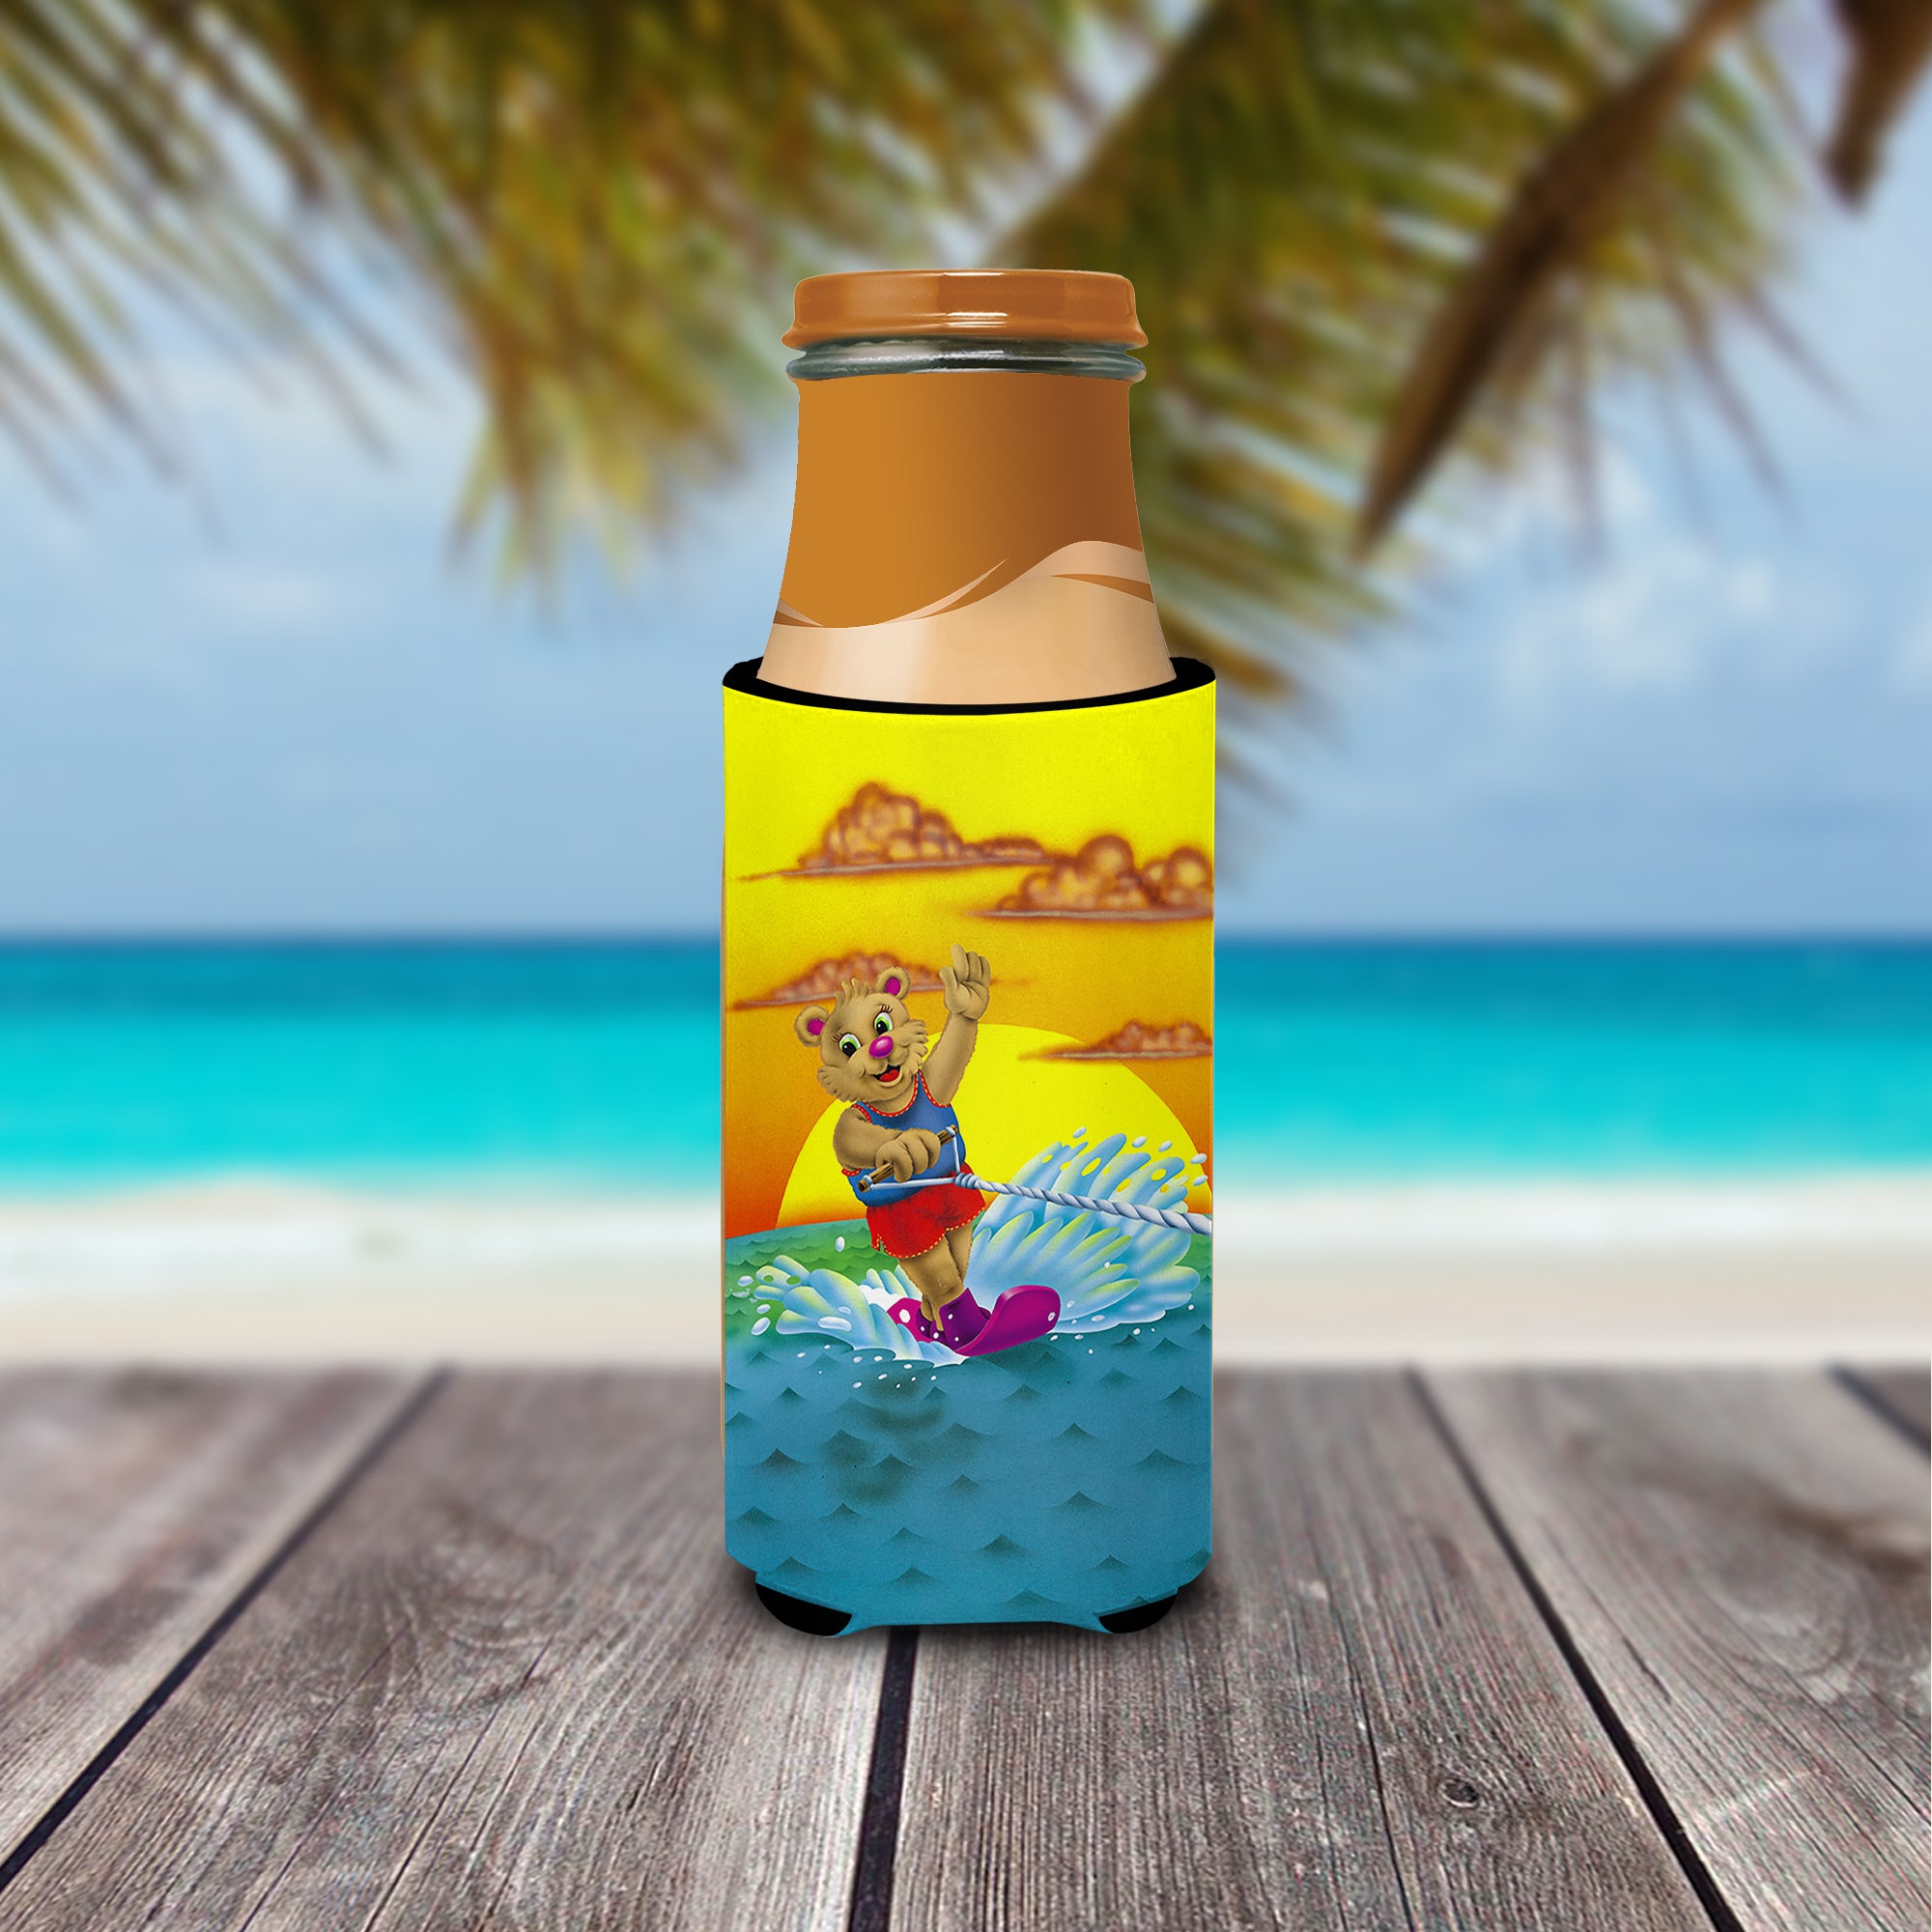 Teddy Bear Water Skiing  Ultra Beverage Insulators for slim cans APH0415MUK  the-store.com.